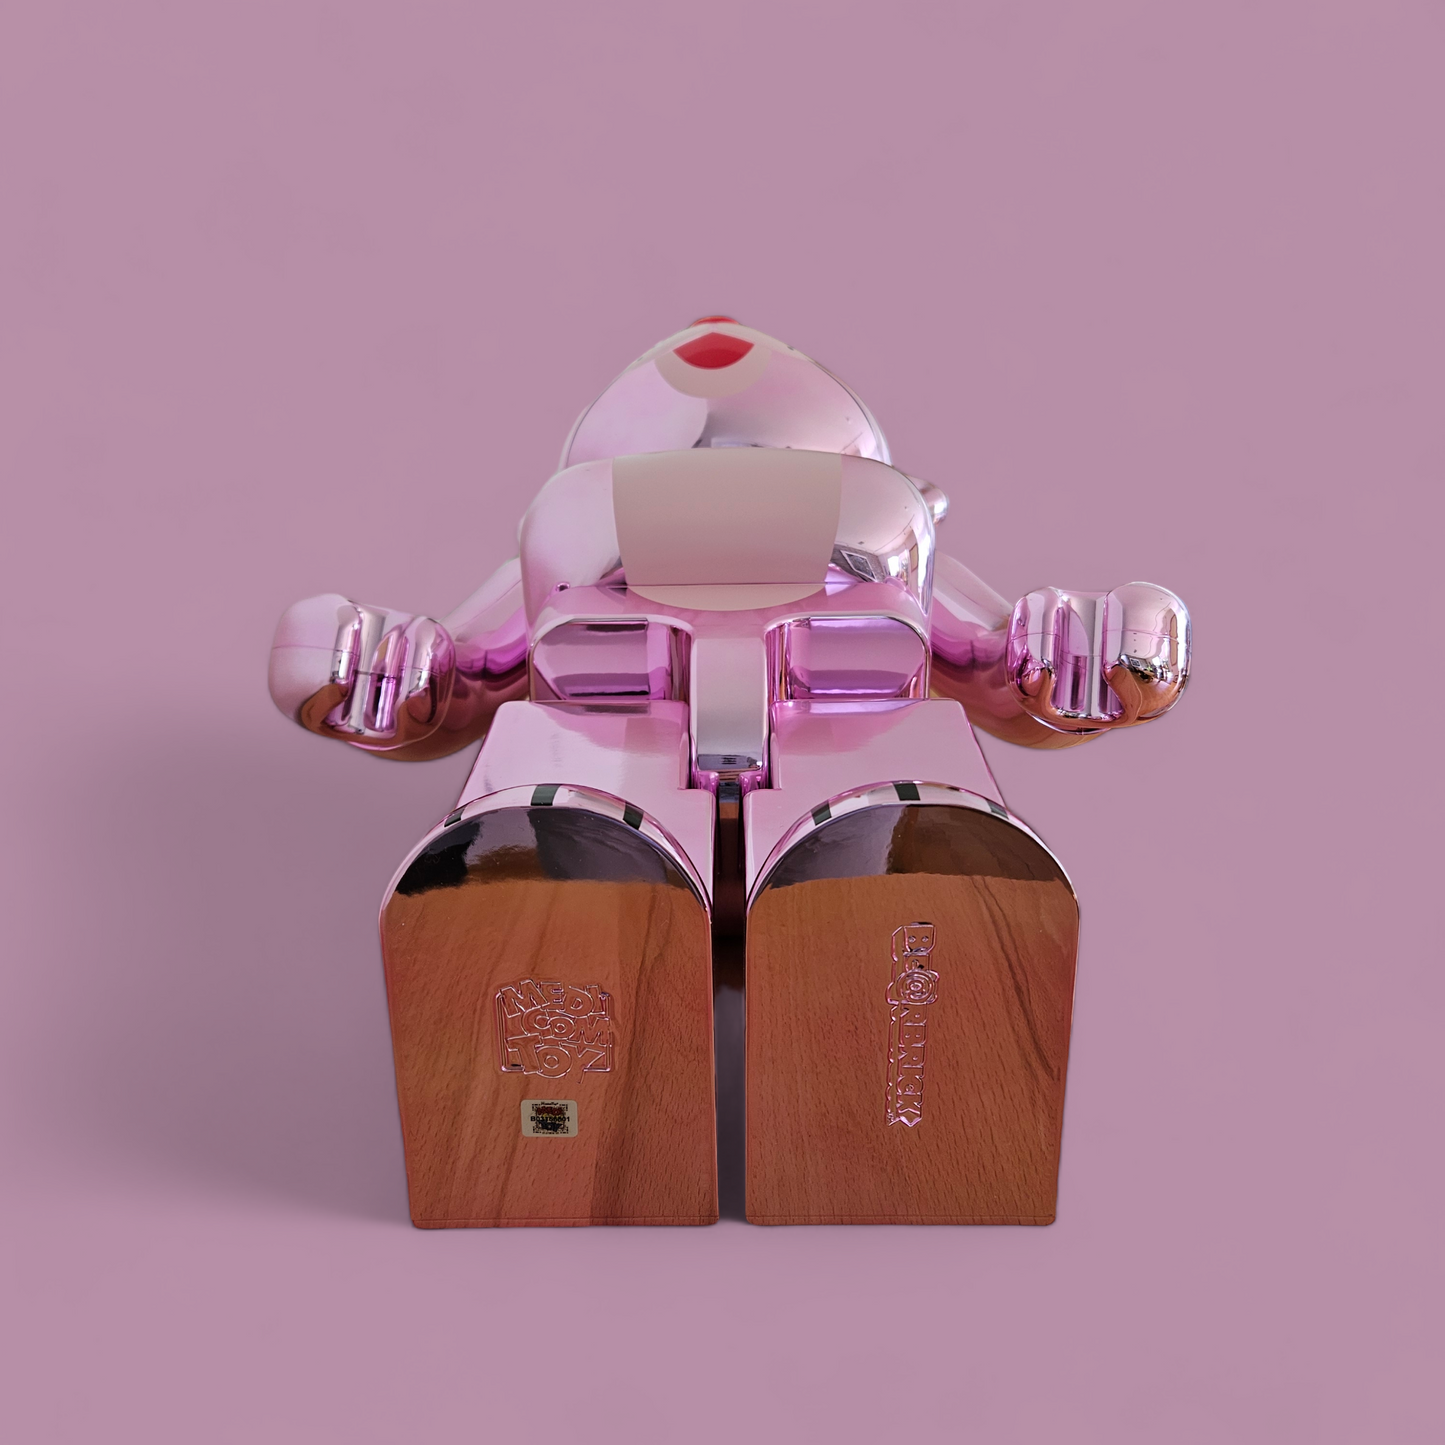 BE@RBRICK Pink Panther Chrome Version (1000%)